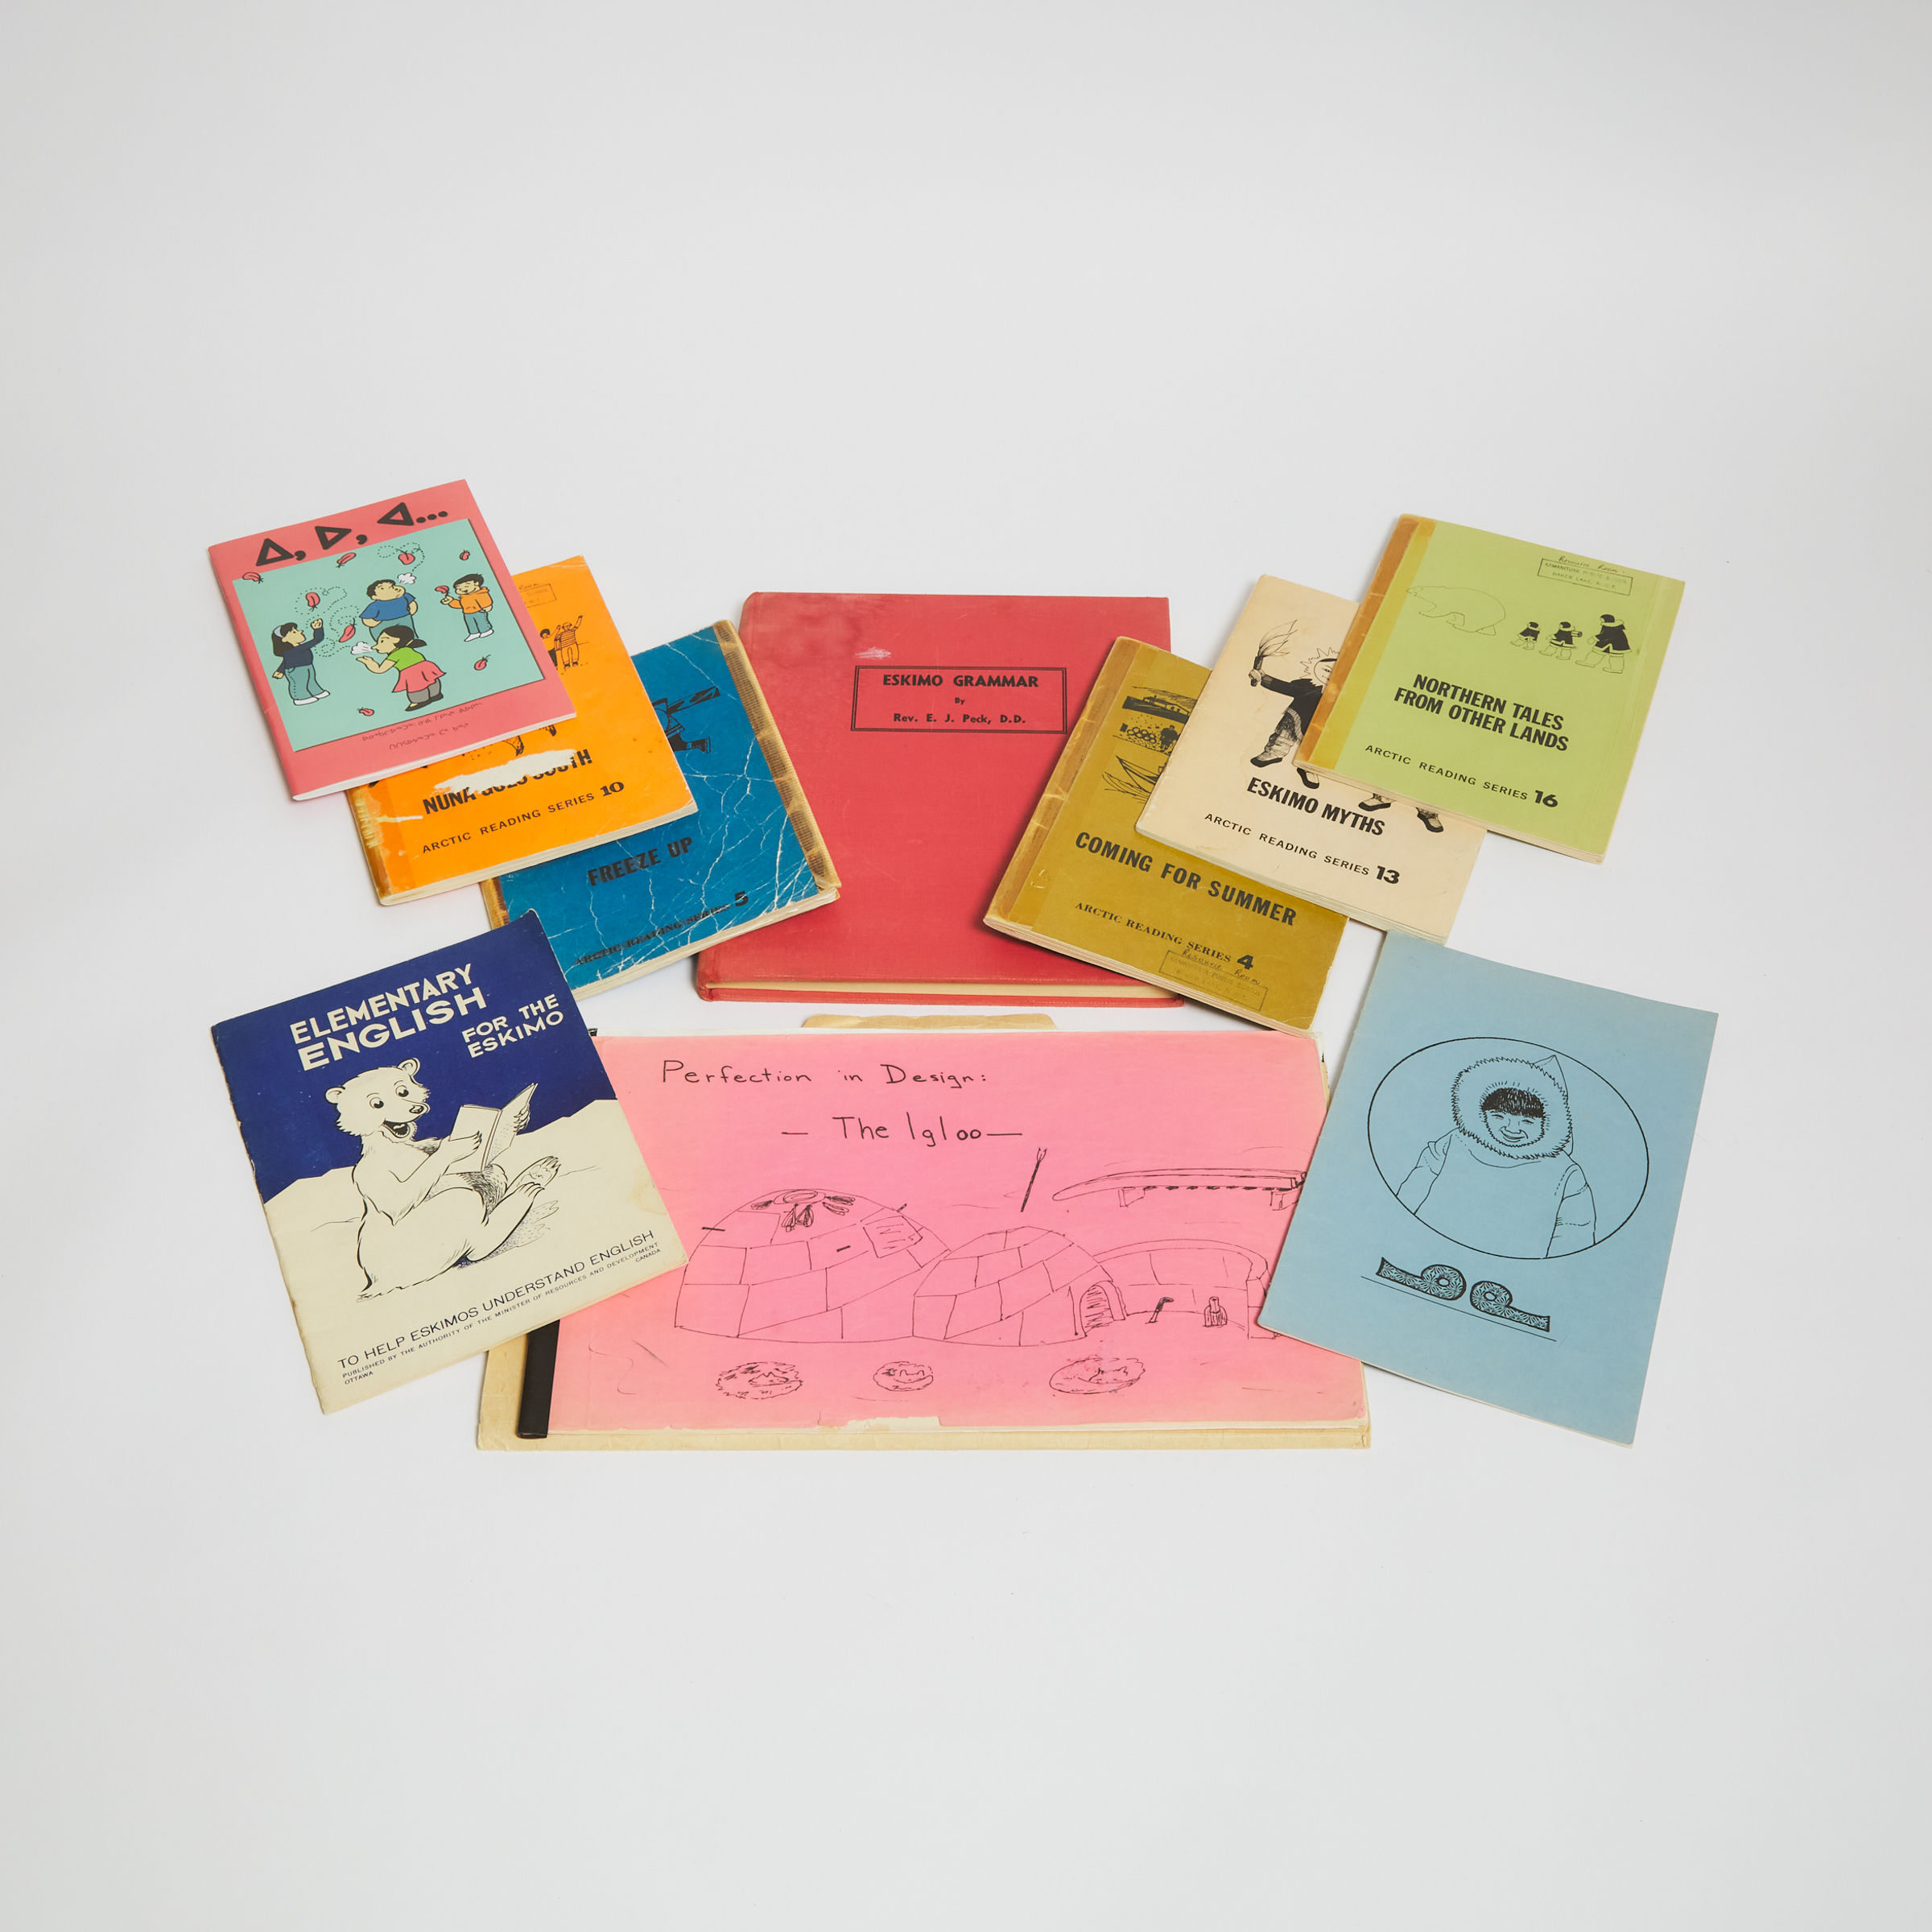 [ARCHIVAL INTEREST, INUIT LANGUAGE AND EDUCATION] LOT OF 10 VOLUMES SOLD TOGETHER